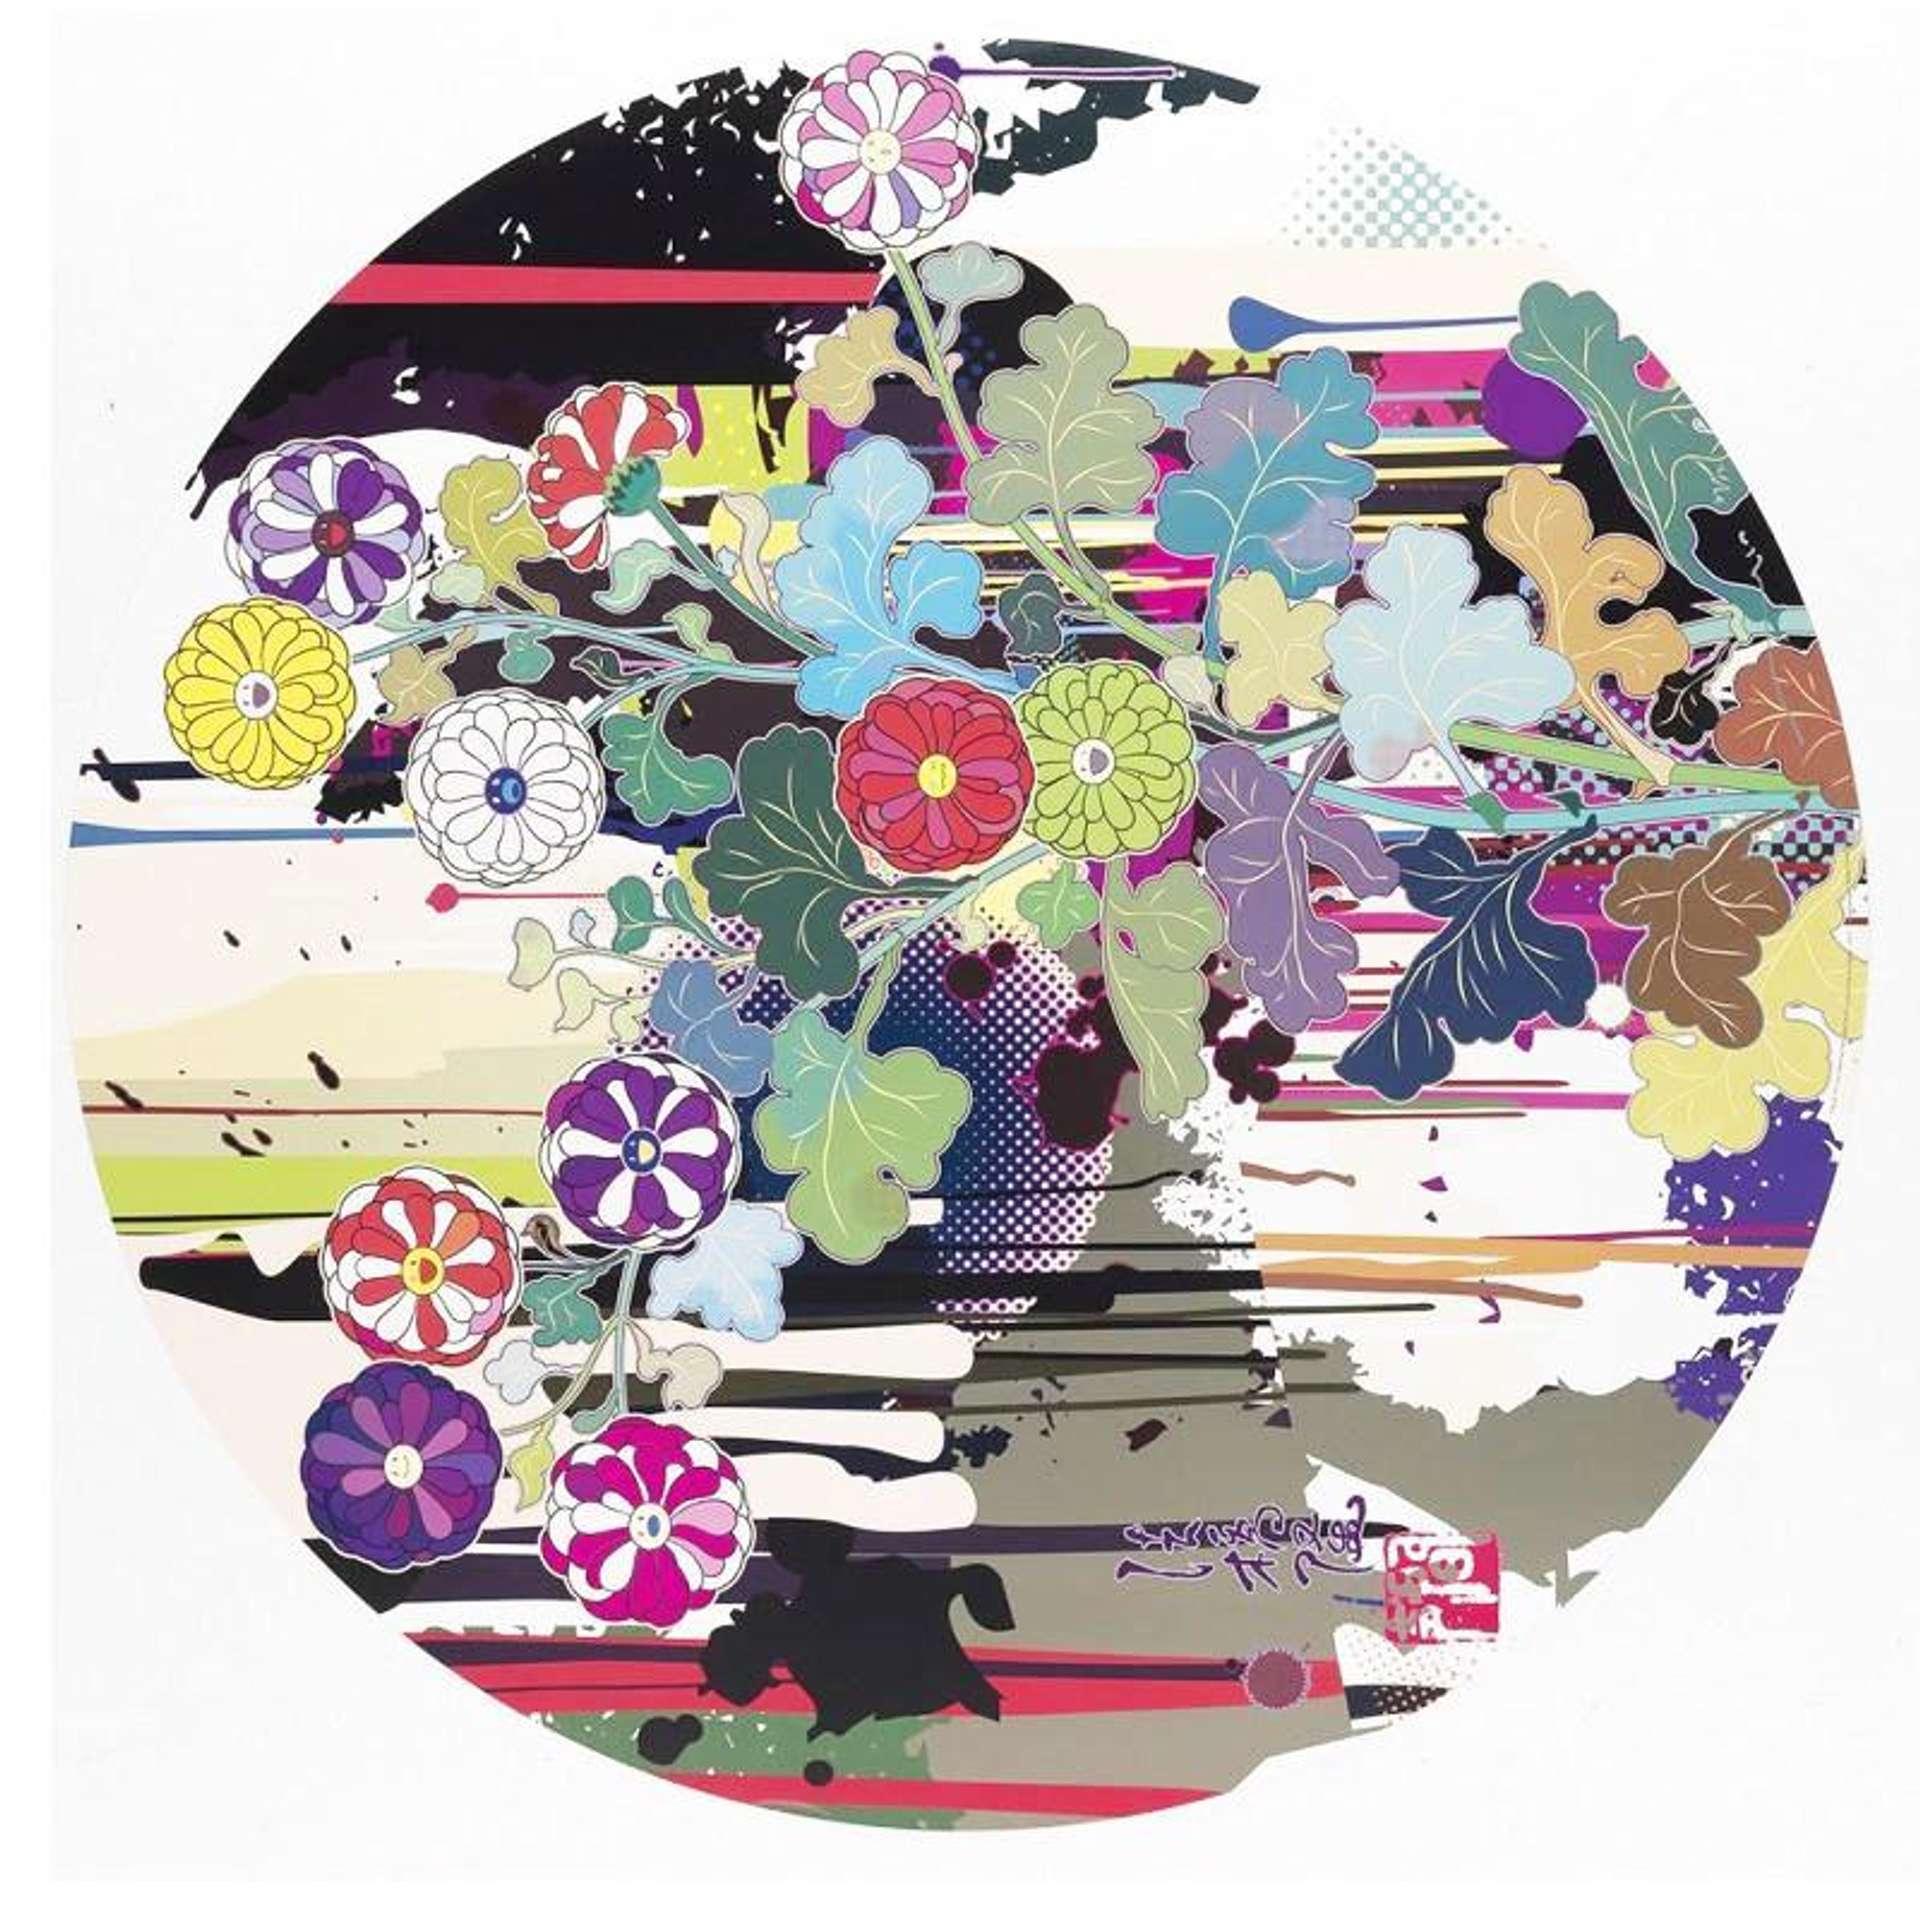 Takashi Murakami: Recall The Time When My Feet Lifted Off The Ground Ever So Slightly Kôrin Chrysanthemum - Signed Print